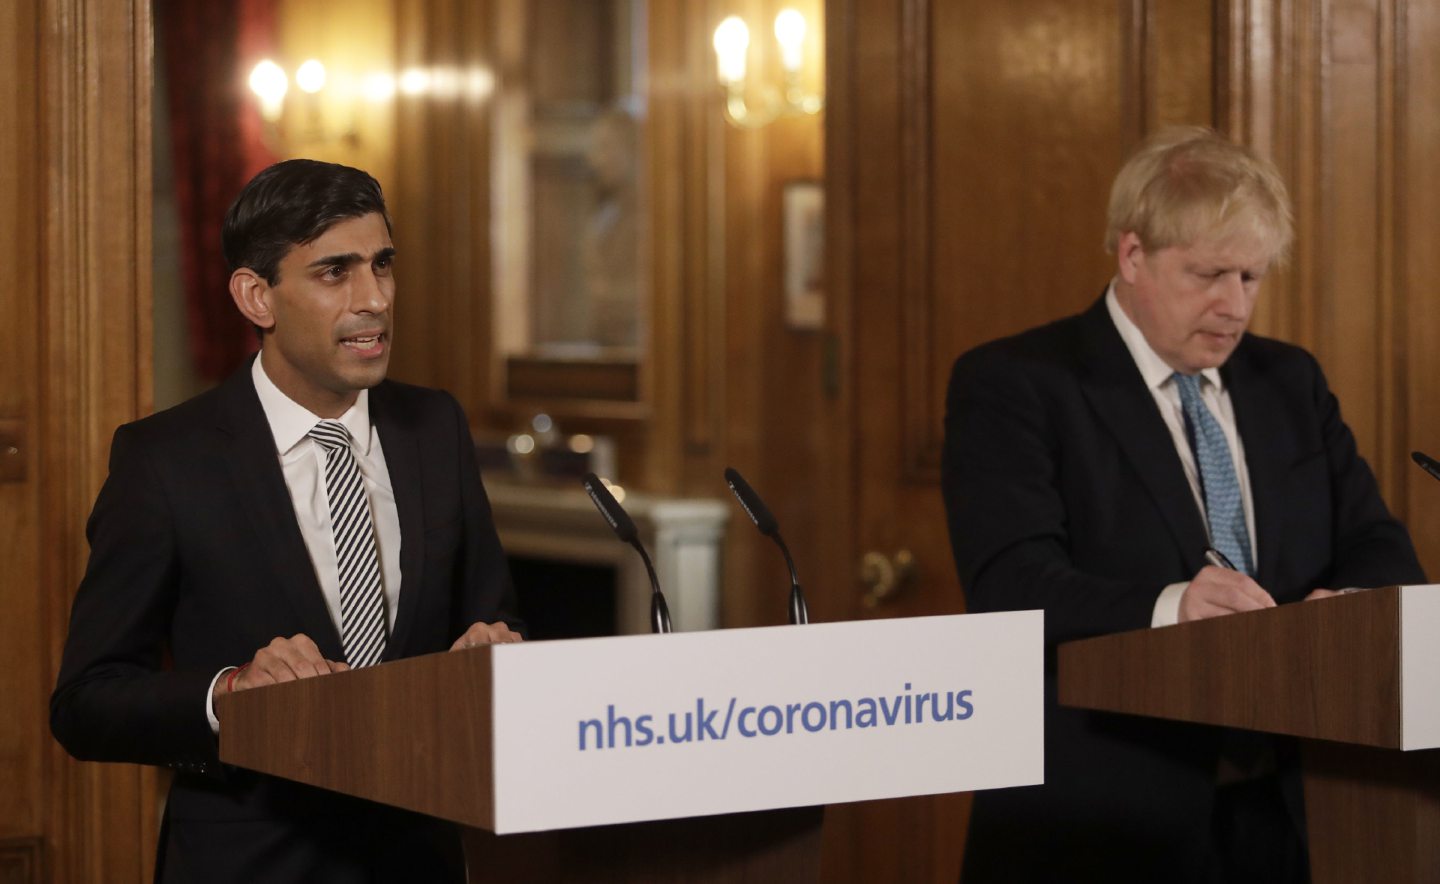 Chancellor Rishi Sunak with Prime Minister Boris Johnson at a media briefing in Downing Street, London, on Coronavirus (COVID-19). Picture date: Tuesday March 17, 2020. See PA story HEALTH Coronavirus. Photo credit should read: Matt Dunham/PA Wire